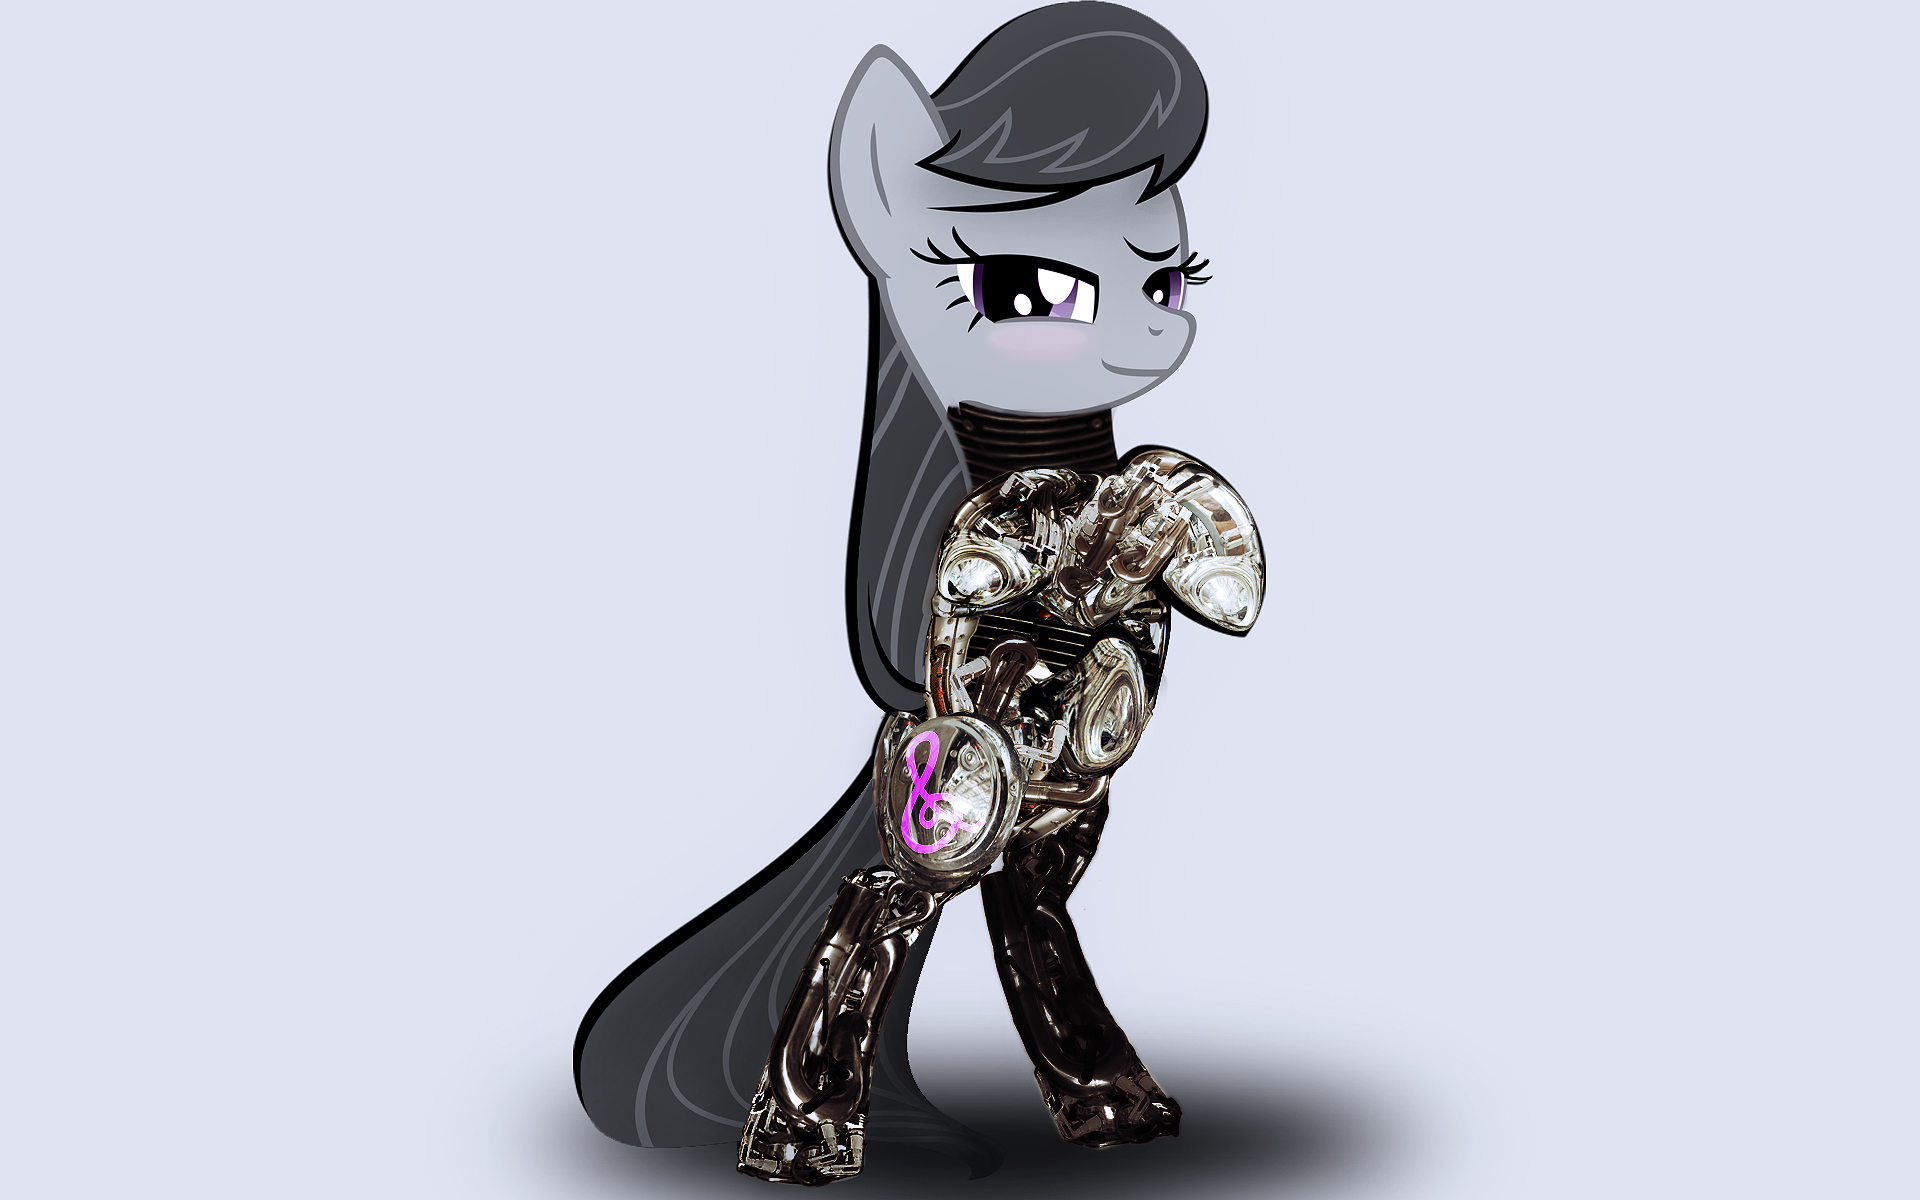 Robot Octavia by MoongazePonies and Vividkinz